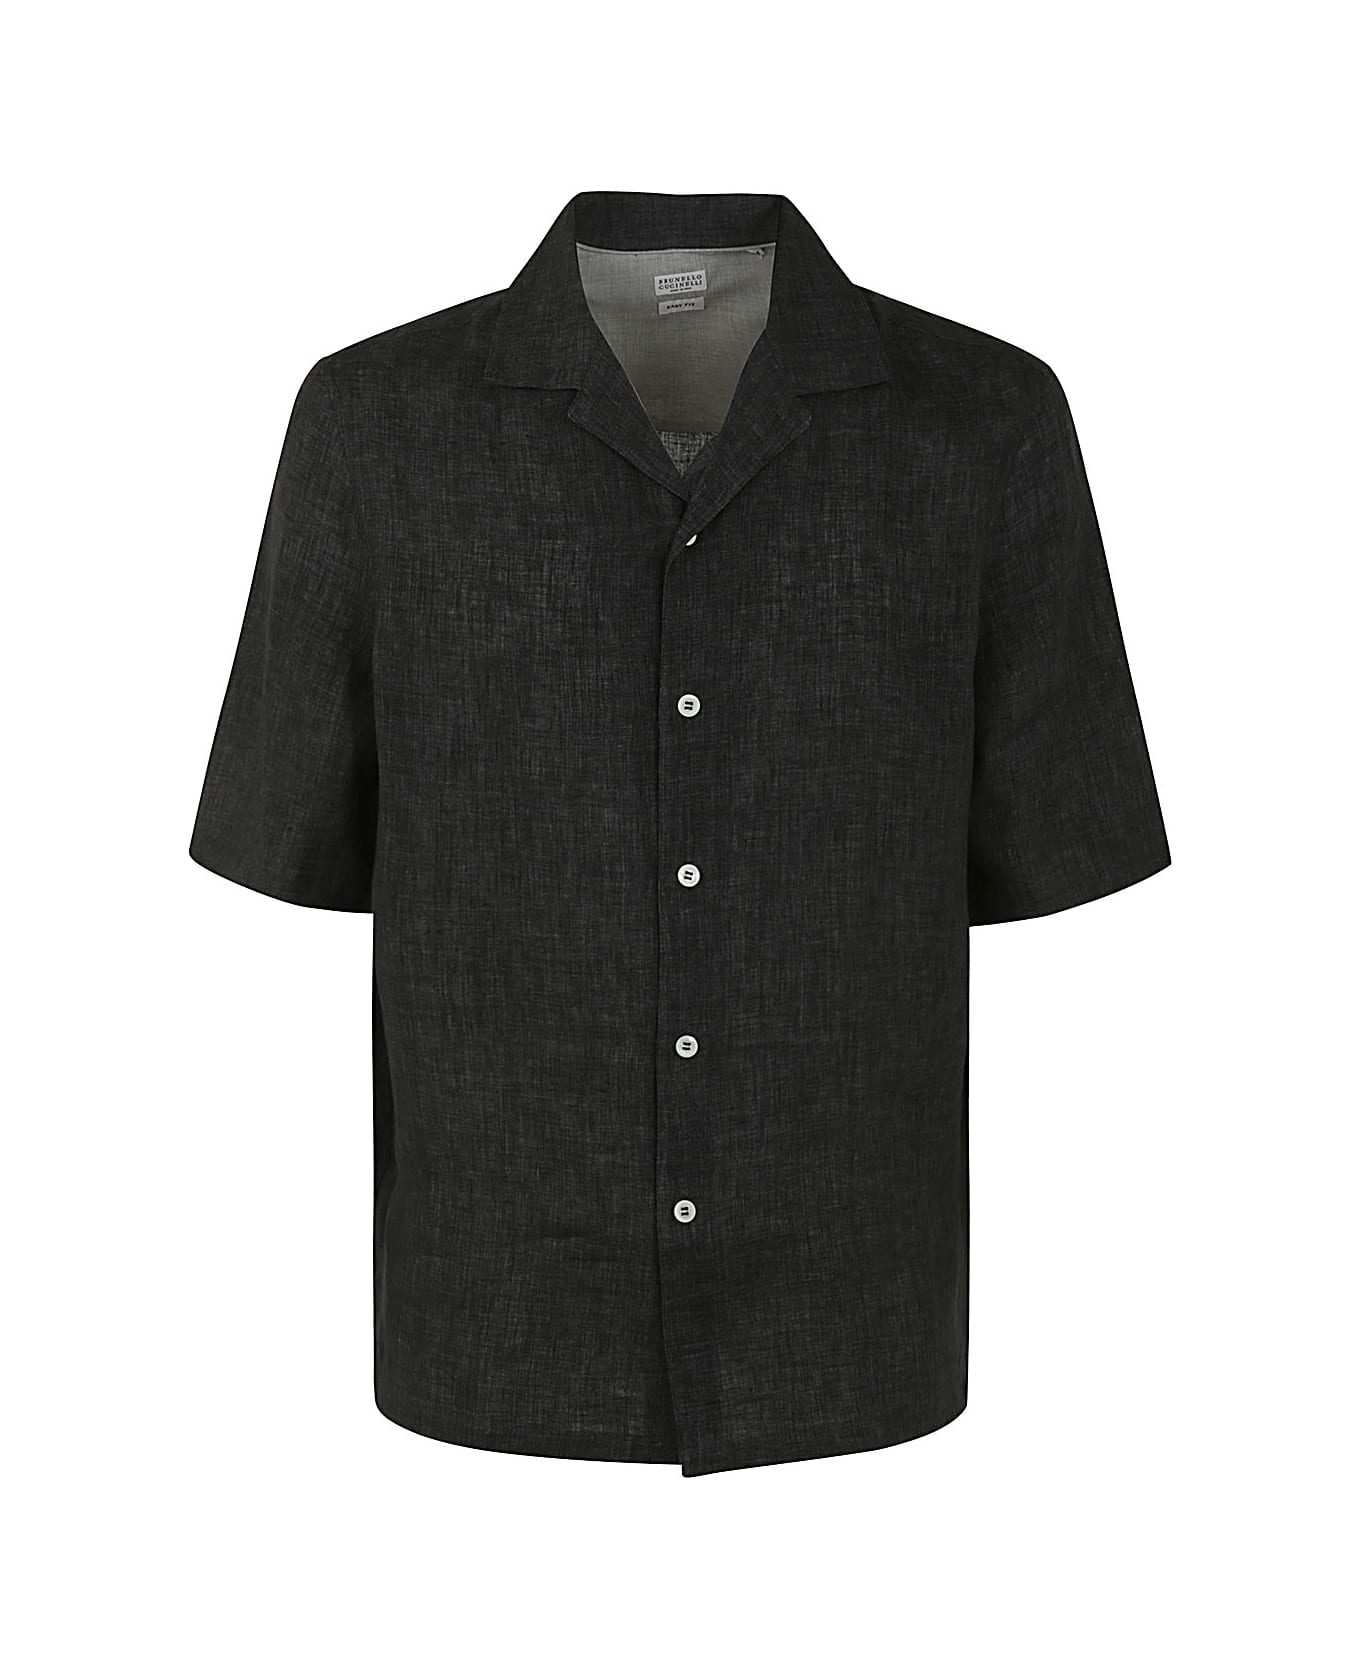 Brunello Cucinelli Chambray Short-sleeved Shirt - Anthracite シャツ